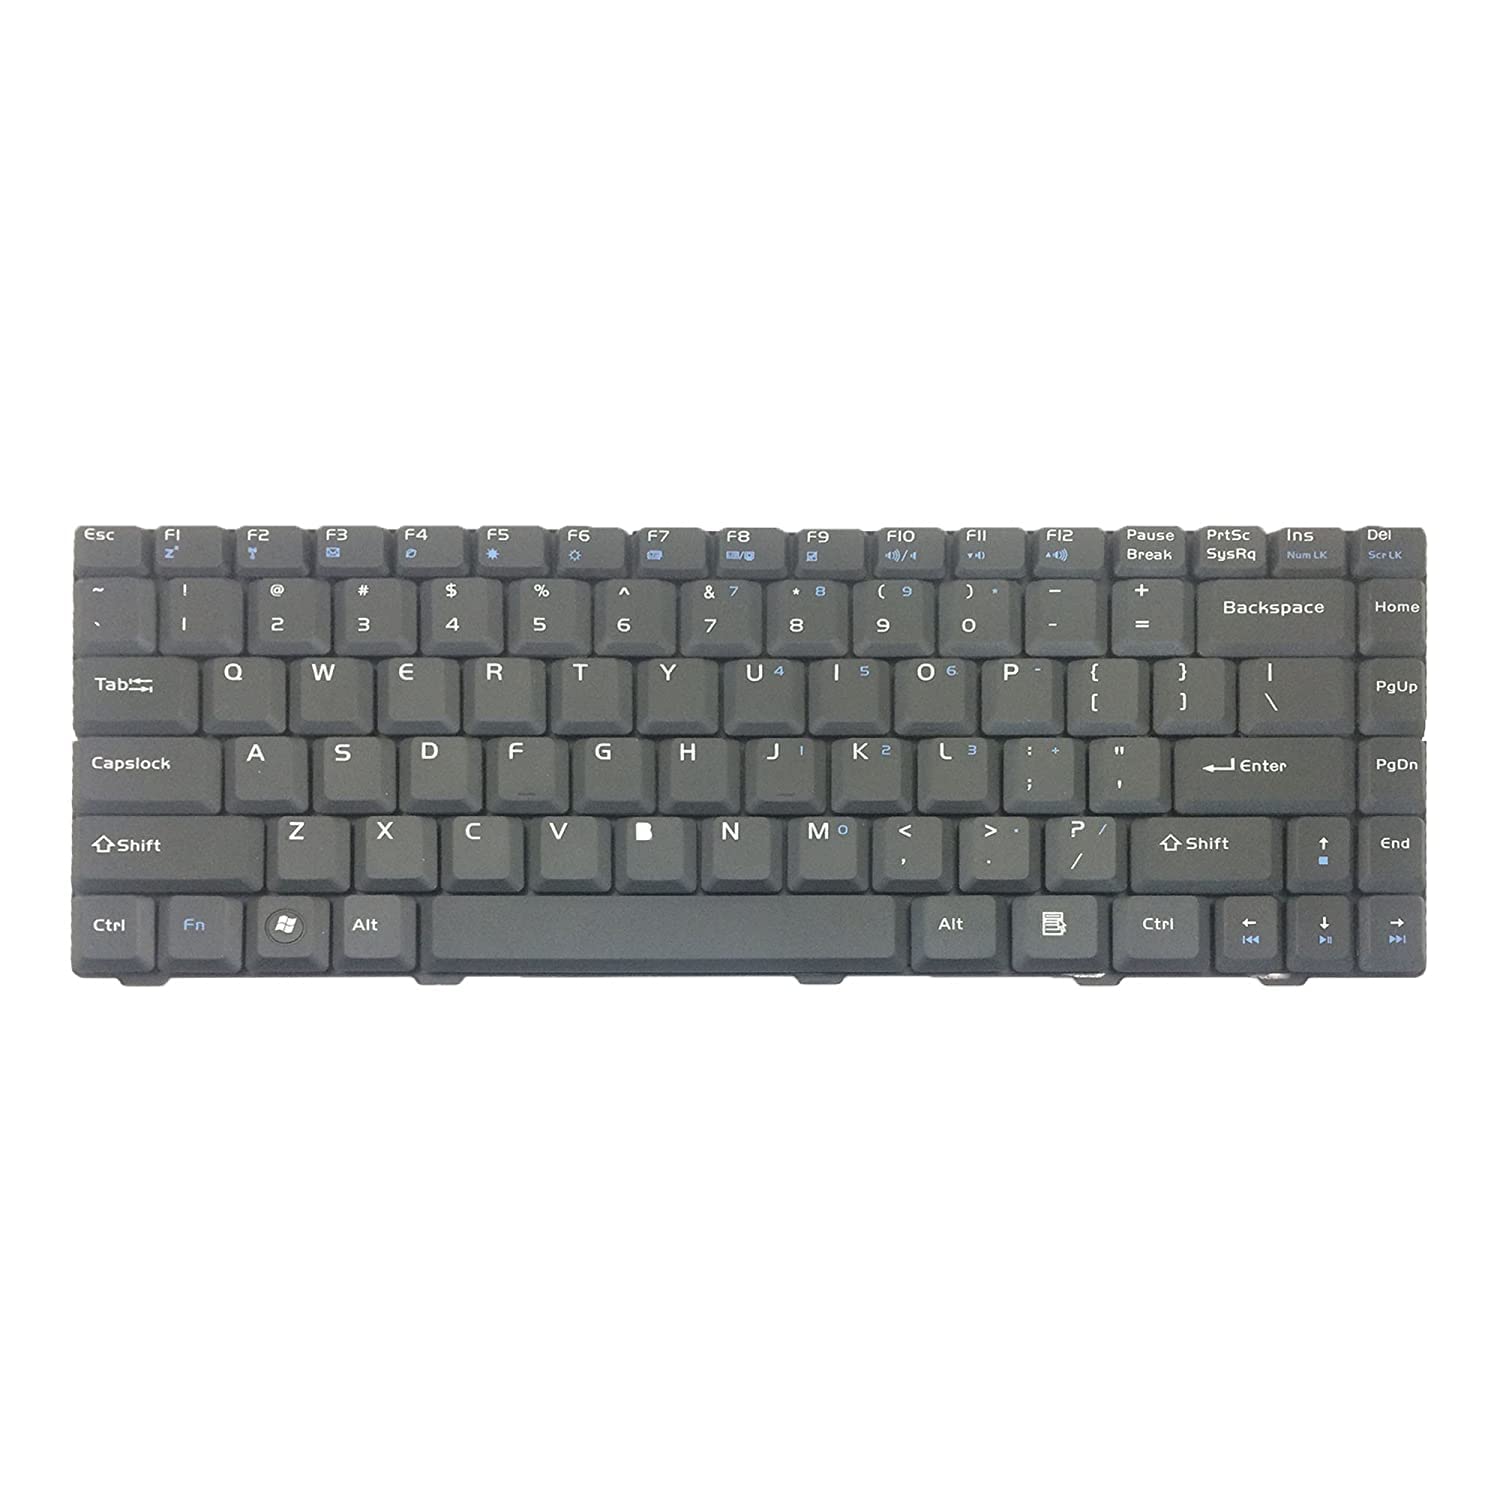 WISTAR Laptop Keyboard Compatible for Asus F80, F80C F80CR X80, X82, X85, F80L, F81SE, F83CR, R46 X88 P/No. V020462CS1, V092362AS1, 0KN0-DE1US01, V092362AS4 Series US (Black